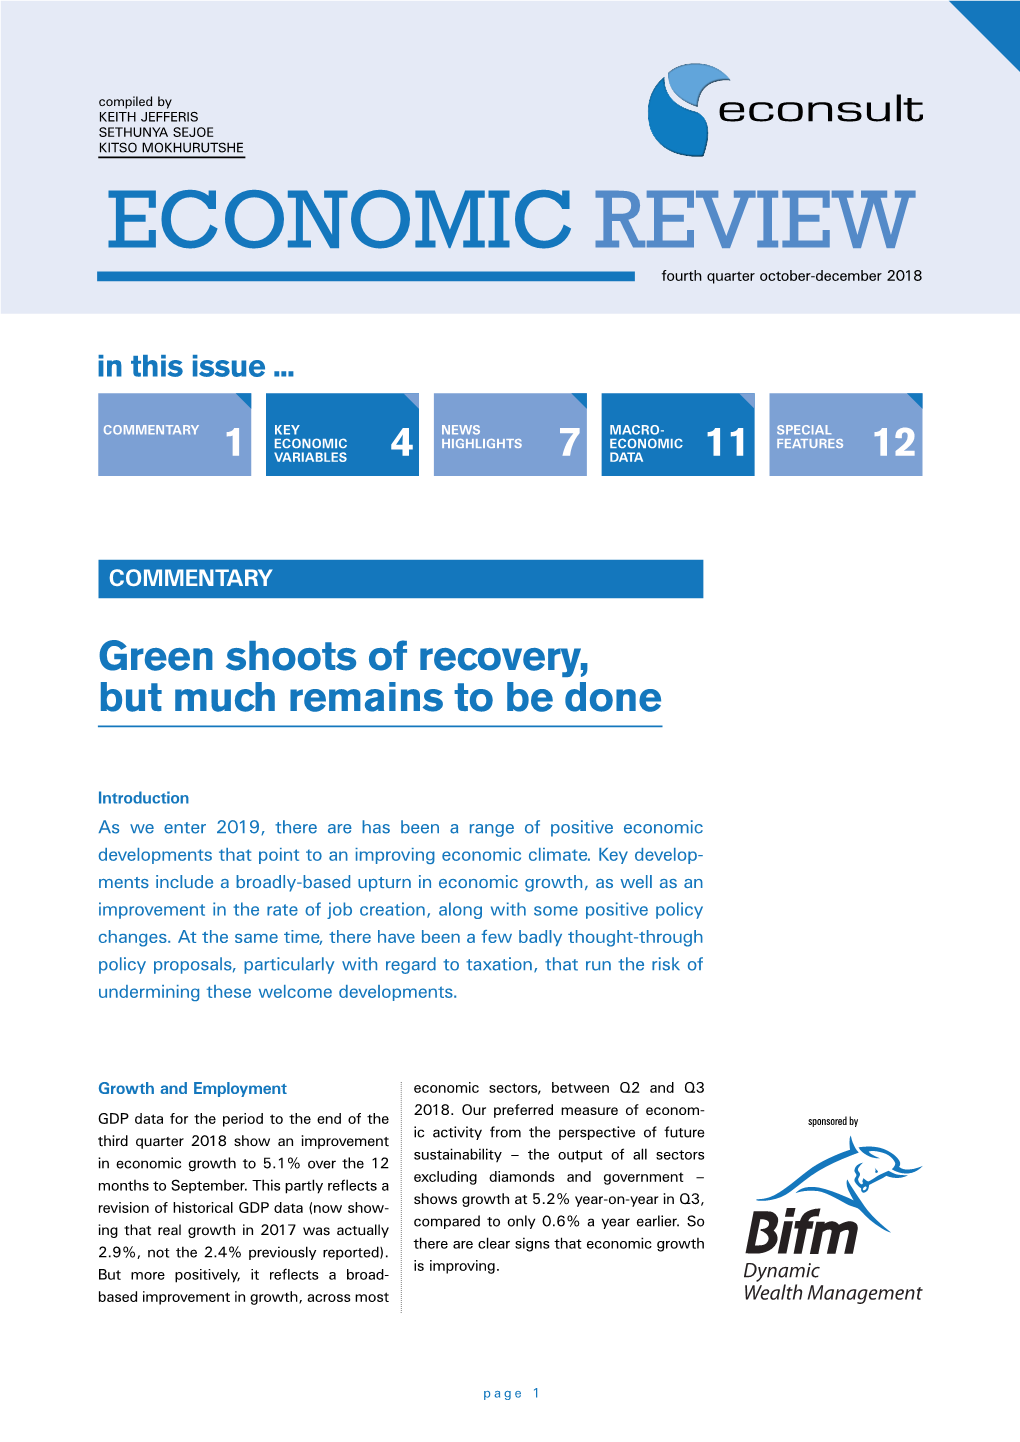 ECONOMIC REVIEW Fourth Quarter October-December 2018 in This Issue